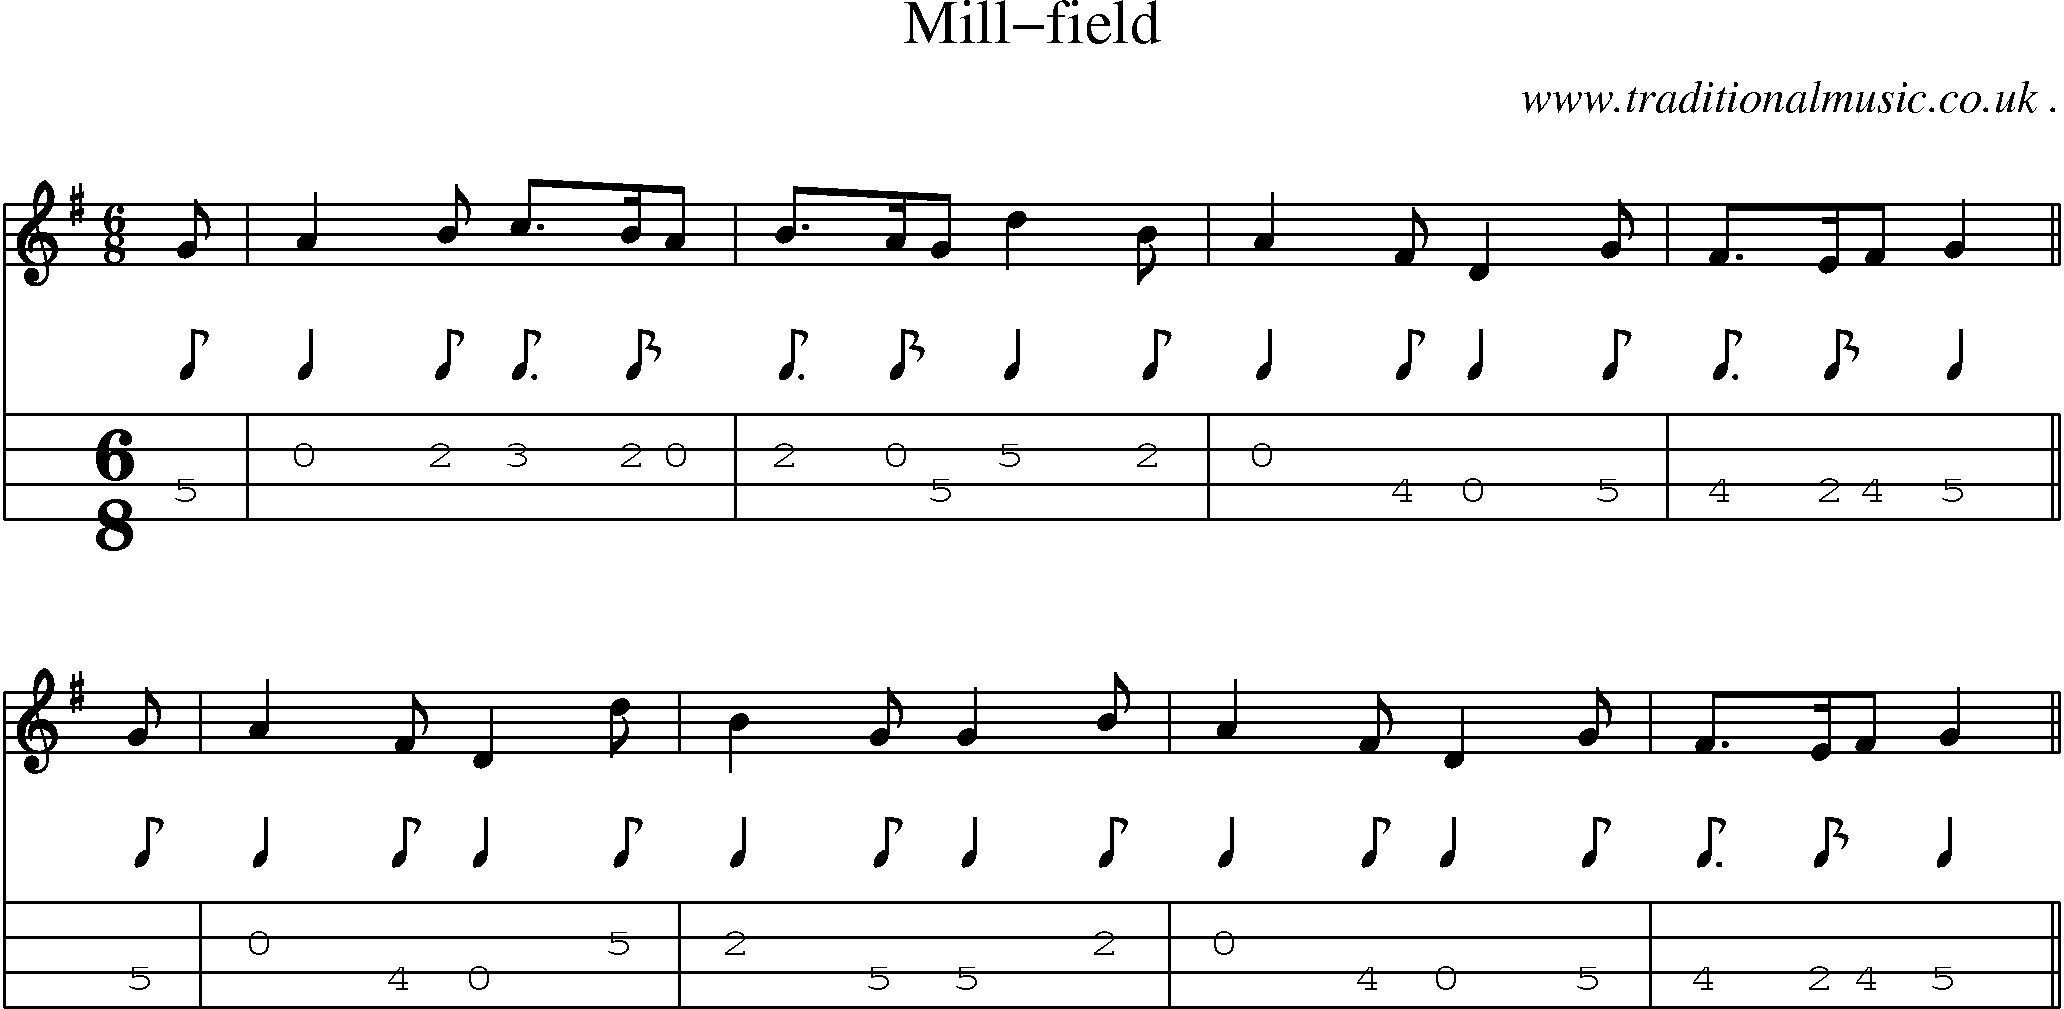 Sheet-music  score, Chords and Mandolin Tabs for Mill-field